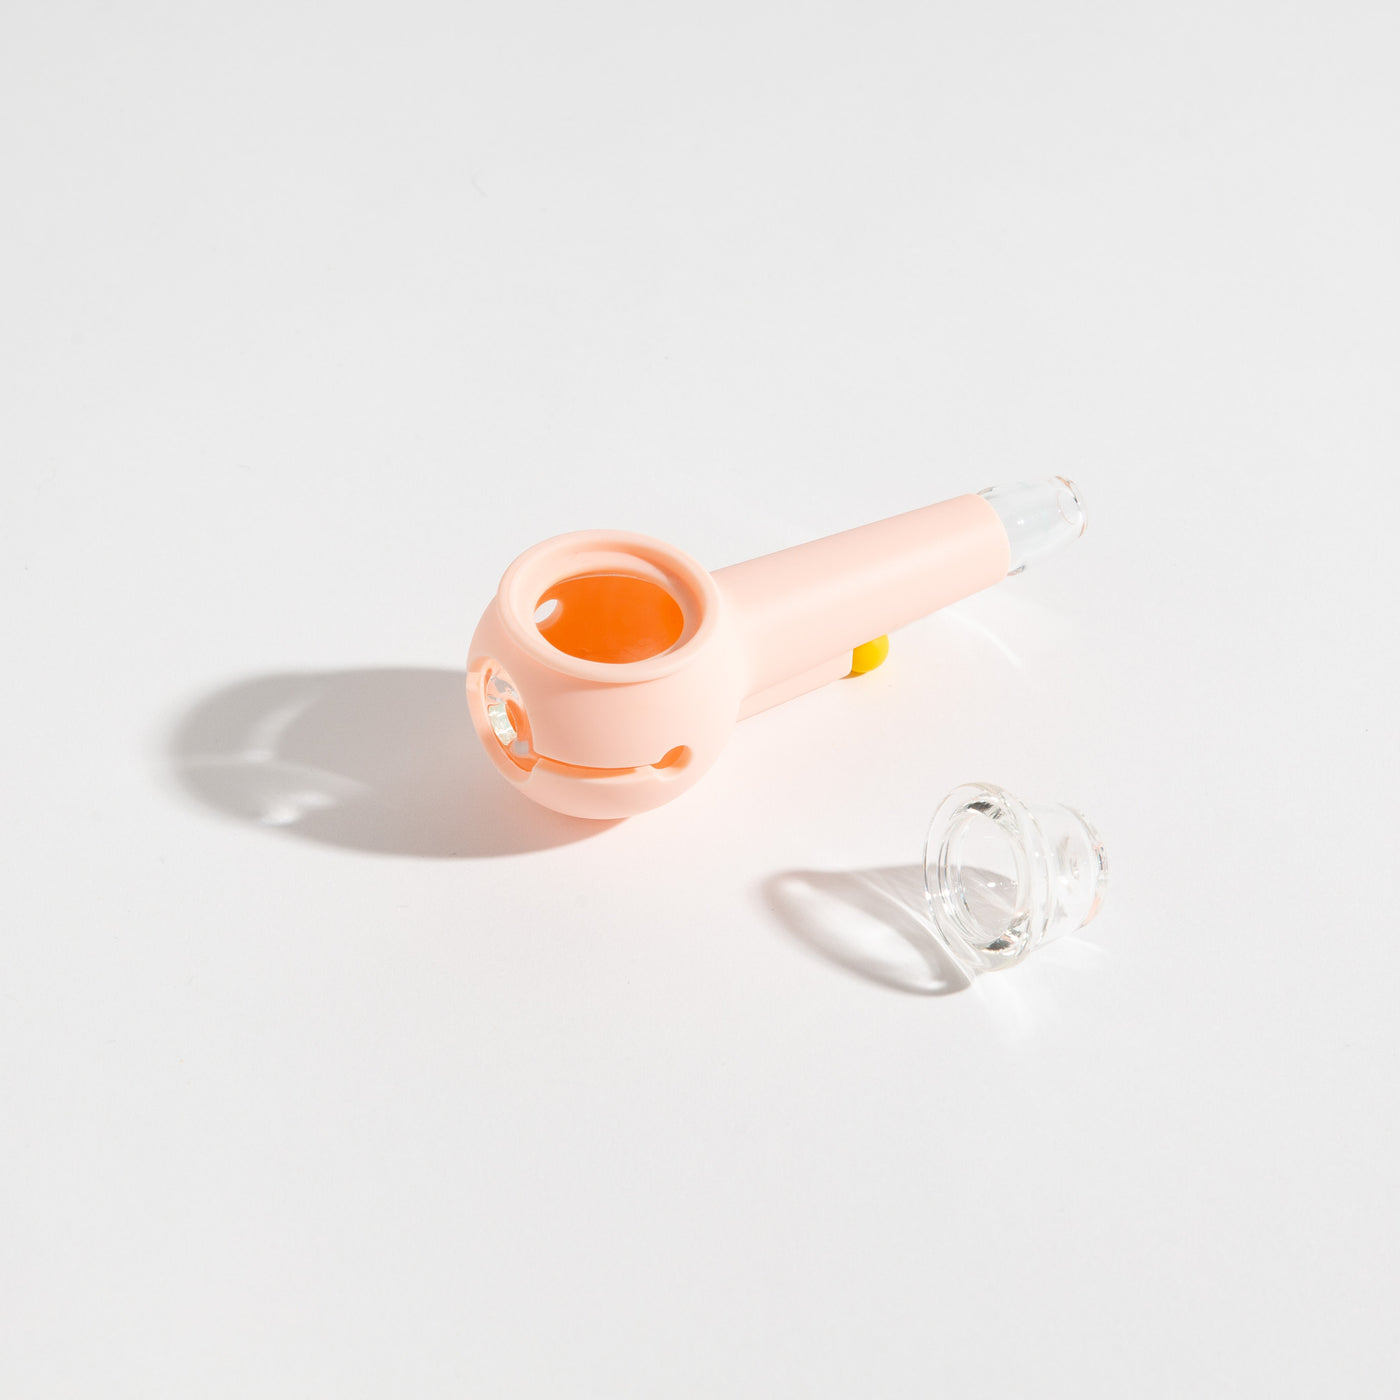 Bubblegum pink silicone pipe with detachable glass bowl on a white background.